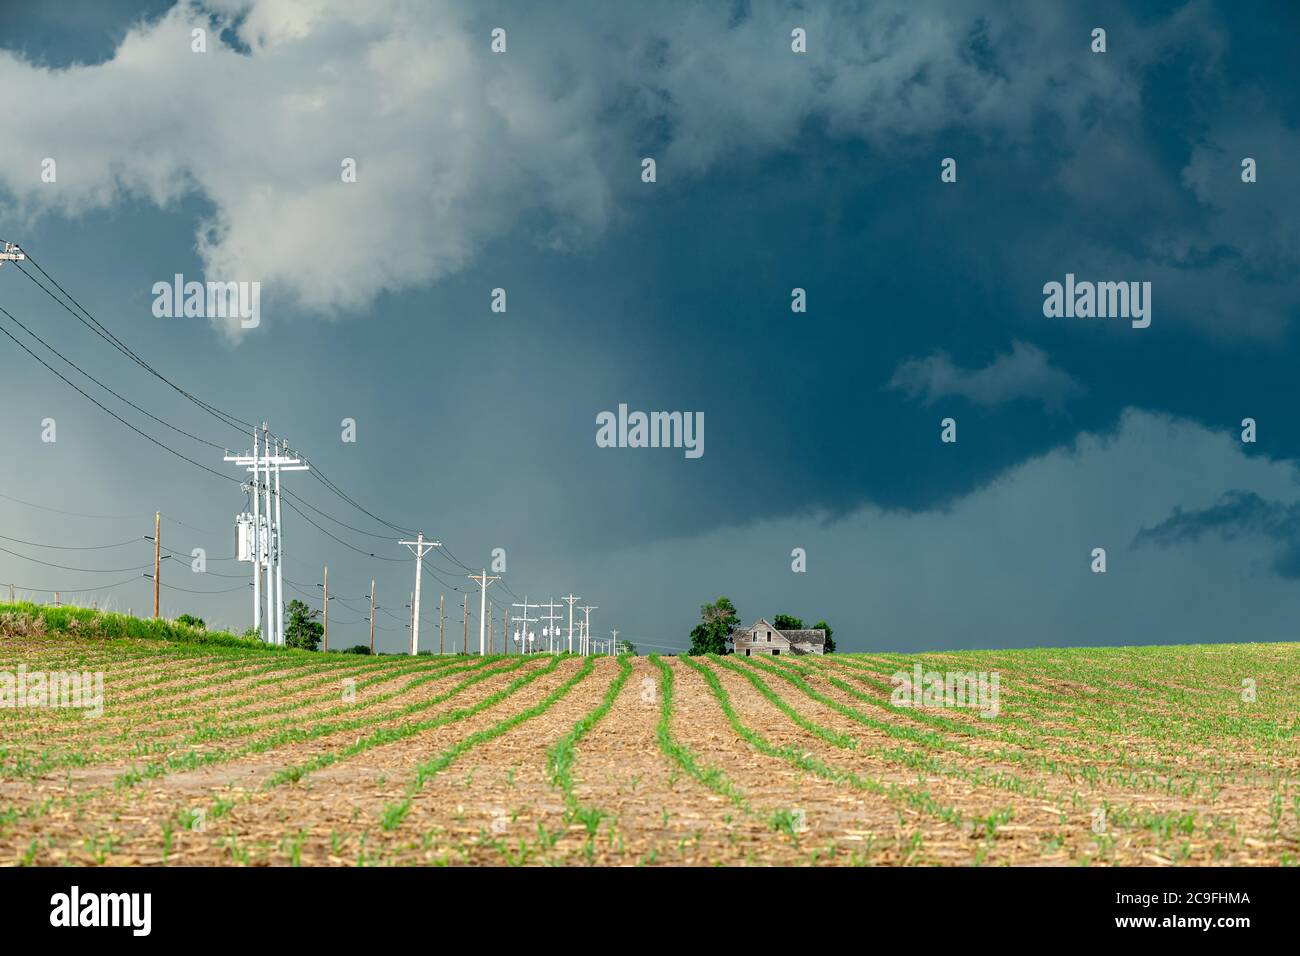 Panorama of a massive storm system, which is a pre-tornado stage, passing over a farm in the Great Plains. Stock Photo